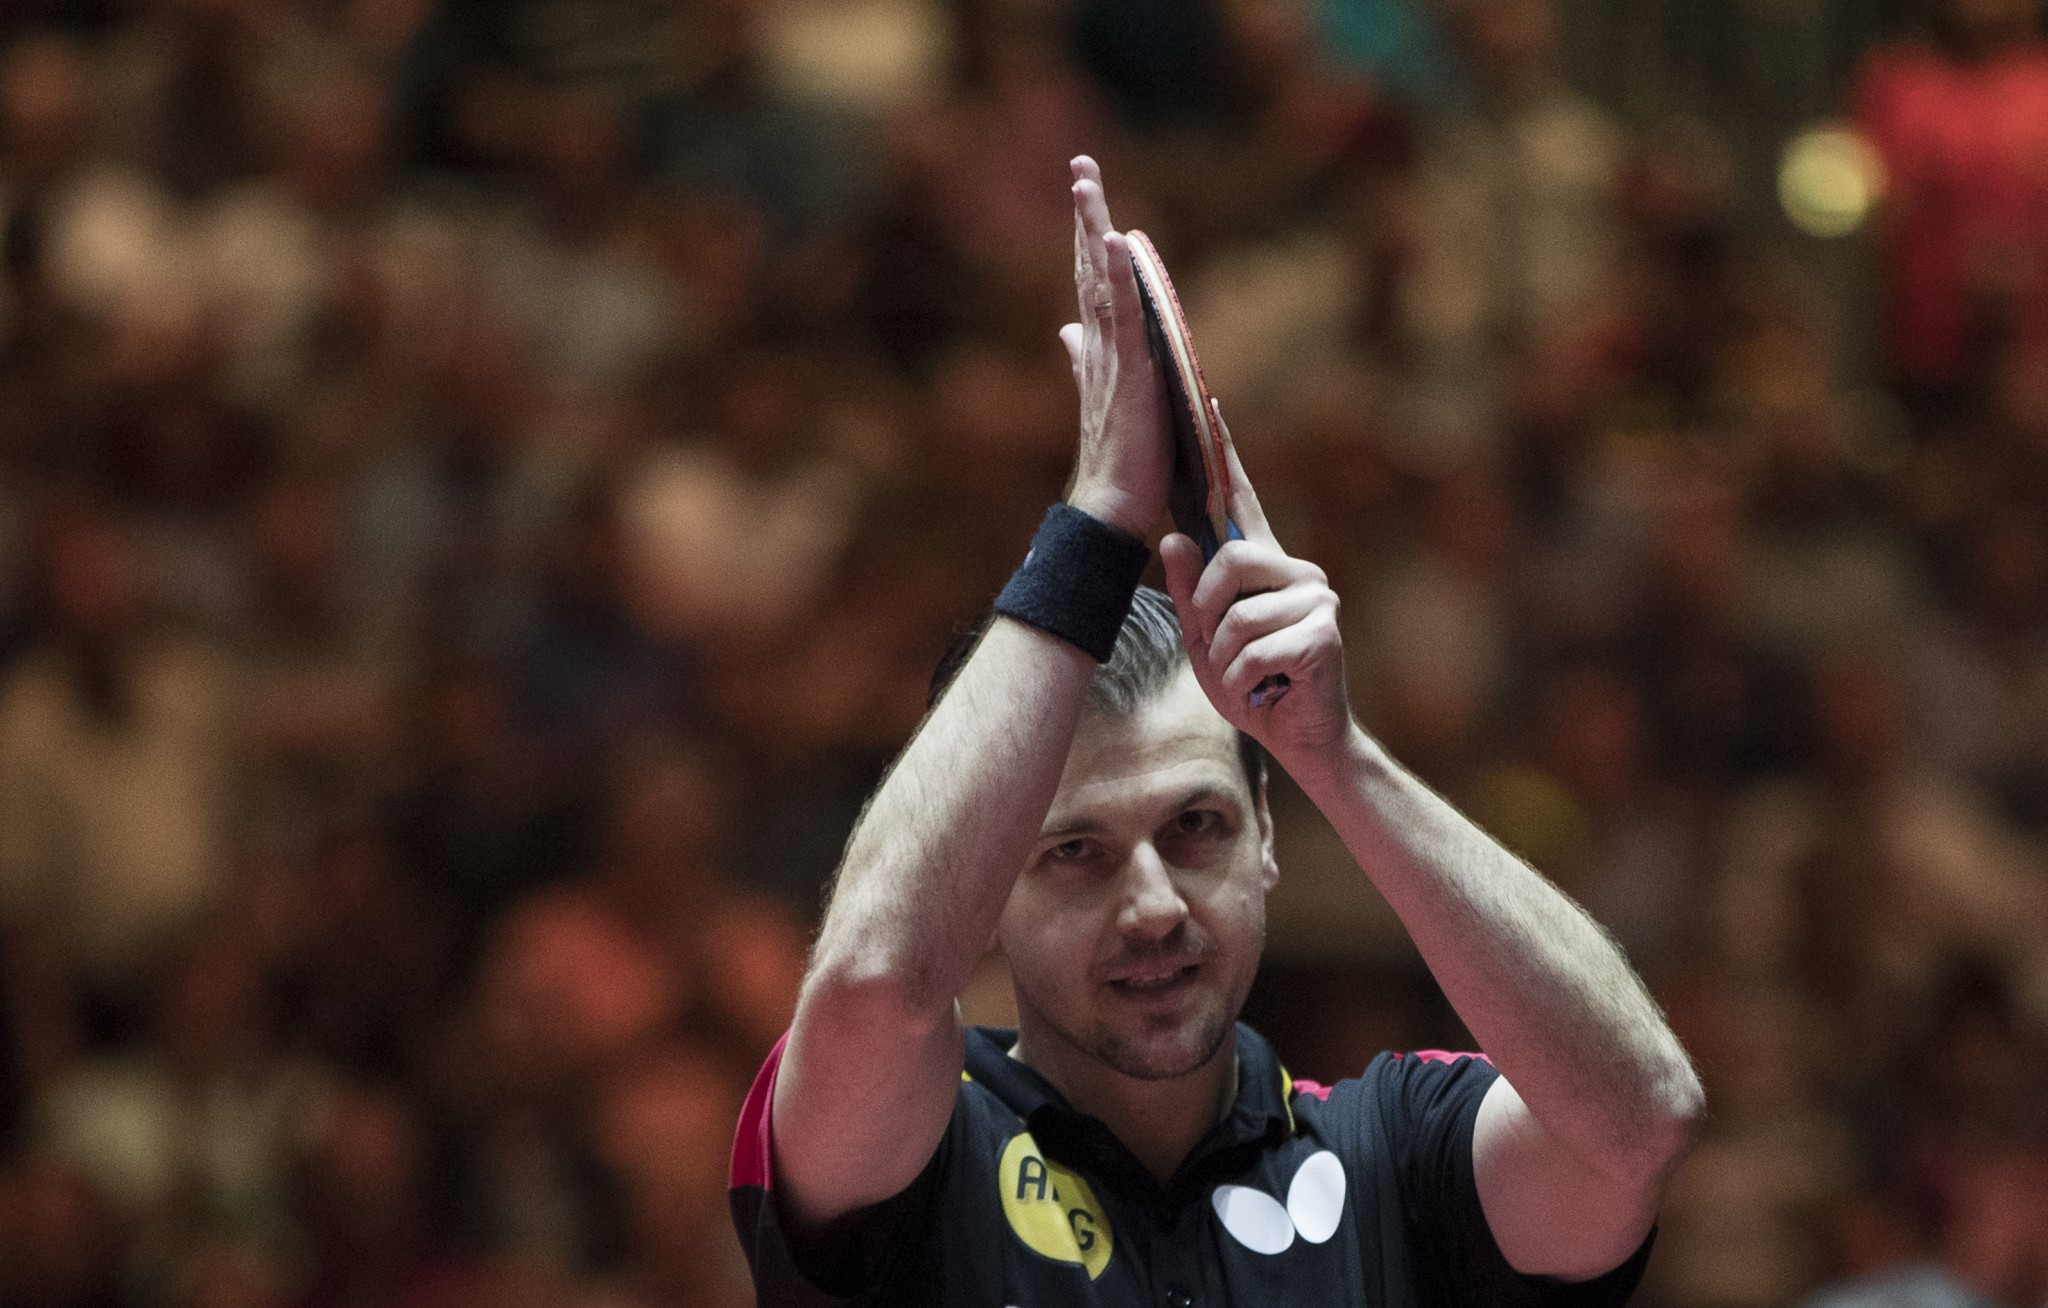 Timo Boll of Germany is seeking a 20th men's singles title on the ITTF World Tour in the Czech Republic this week ©Getty Images